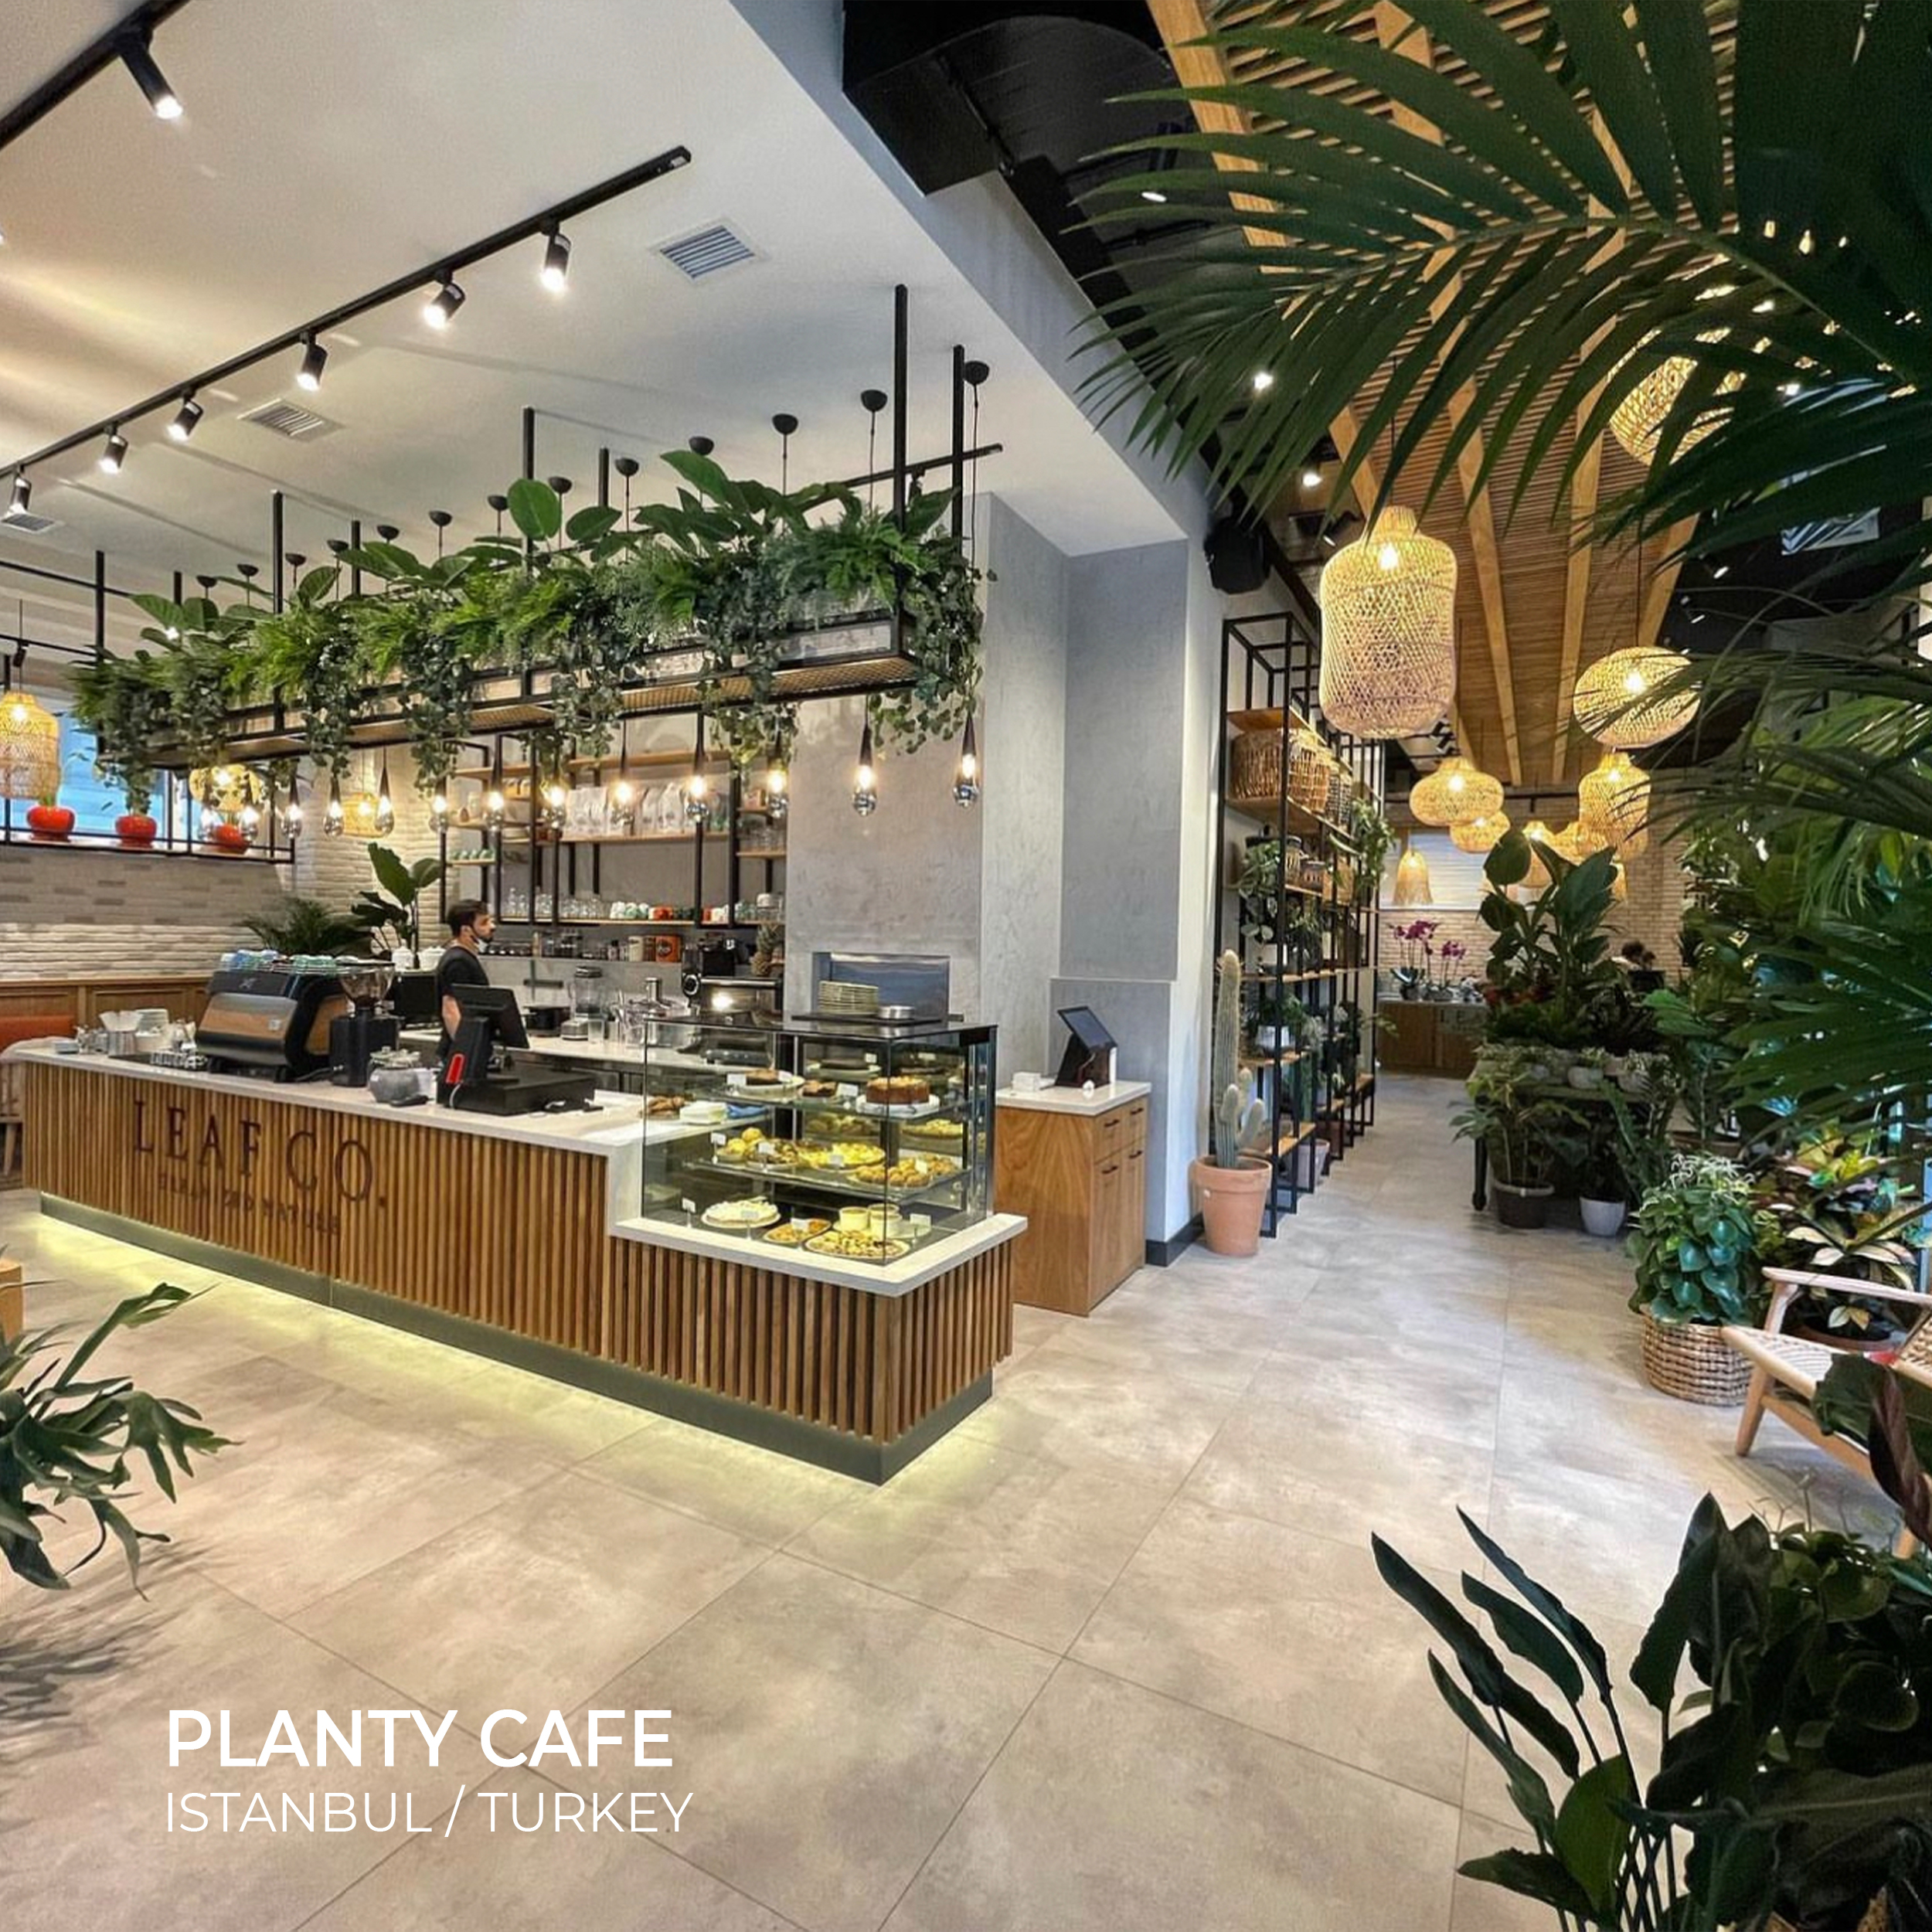 Planty Cafe - Sia Moore